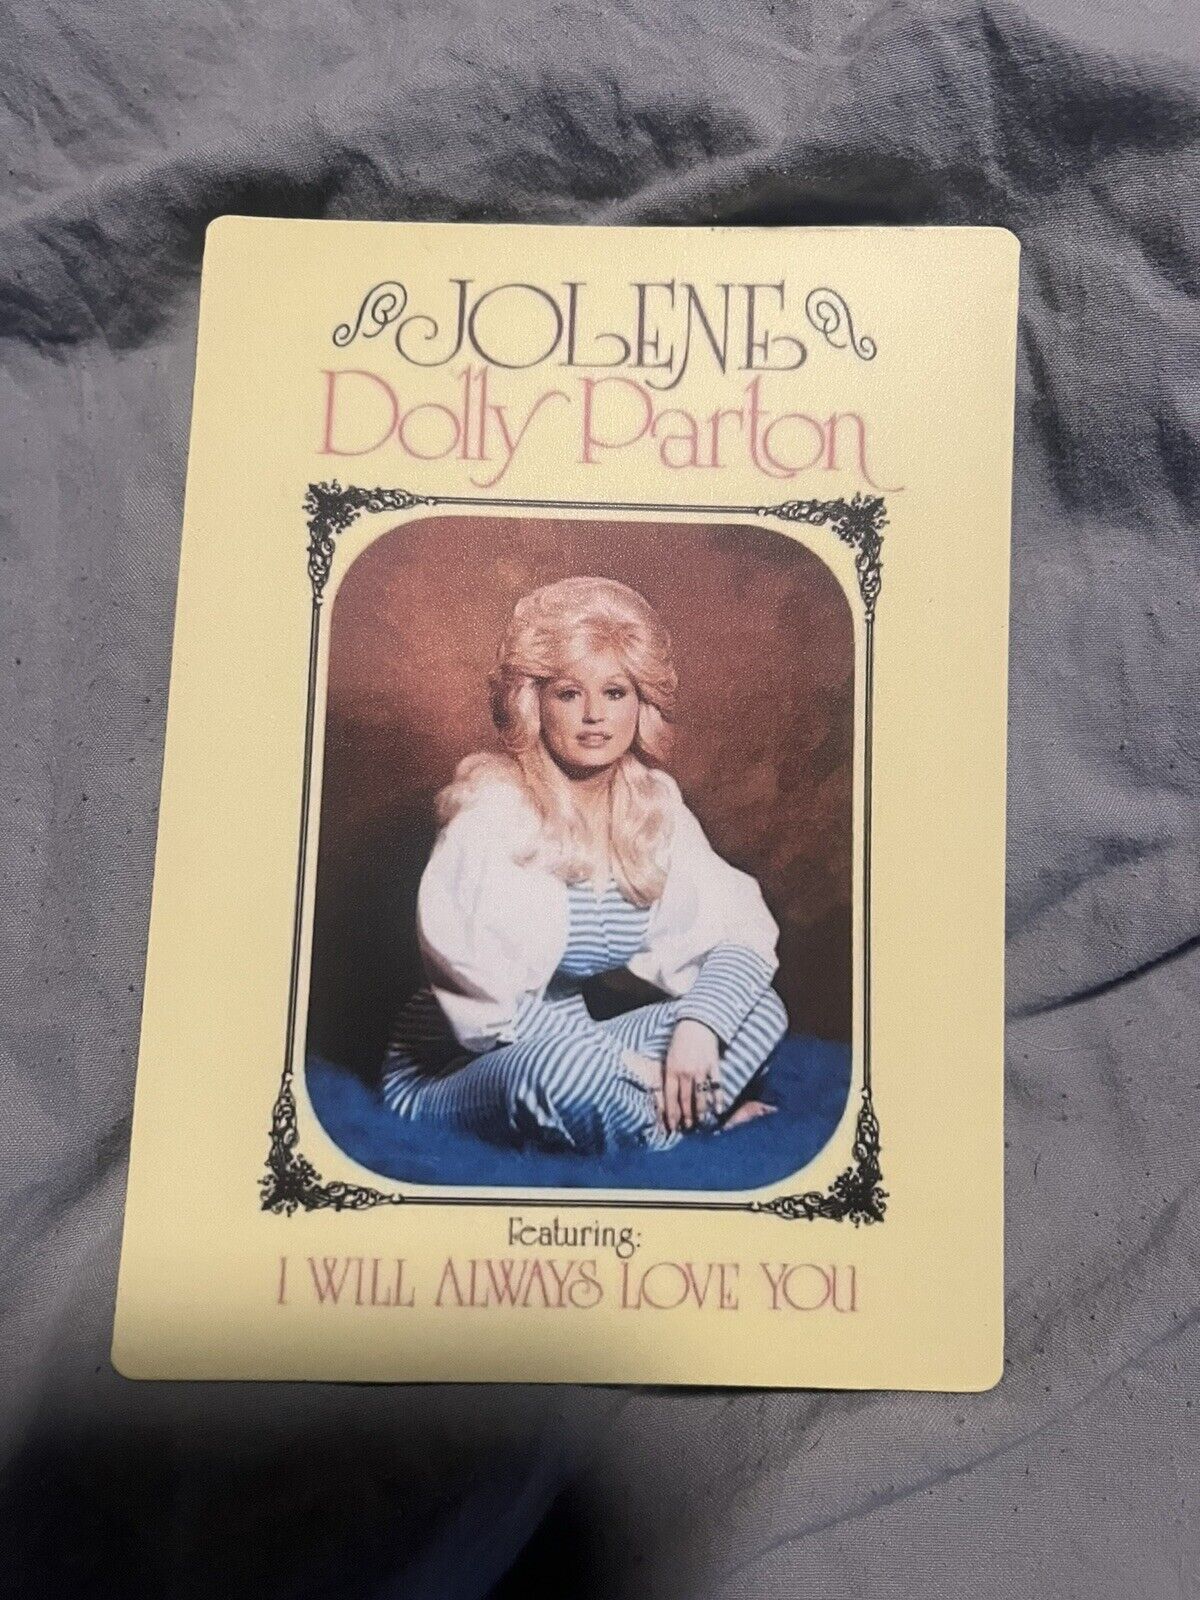 Dolly Parton Vintage Magnets , Album Cover Jolene,Just Because I’m A Woman,Fan